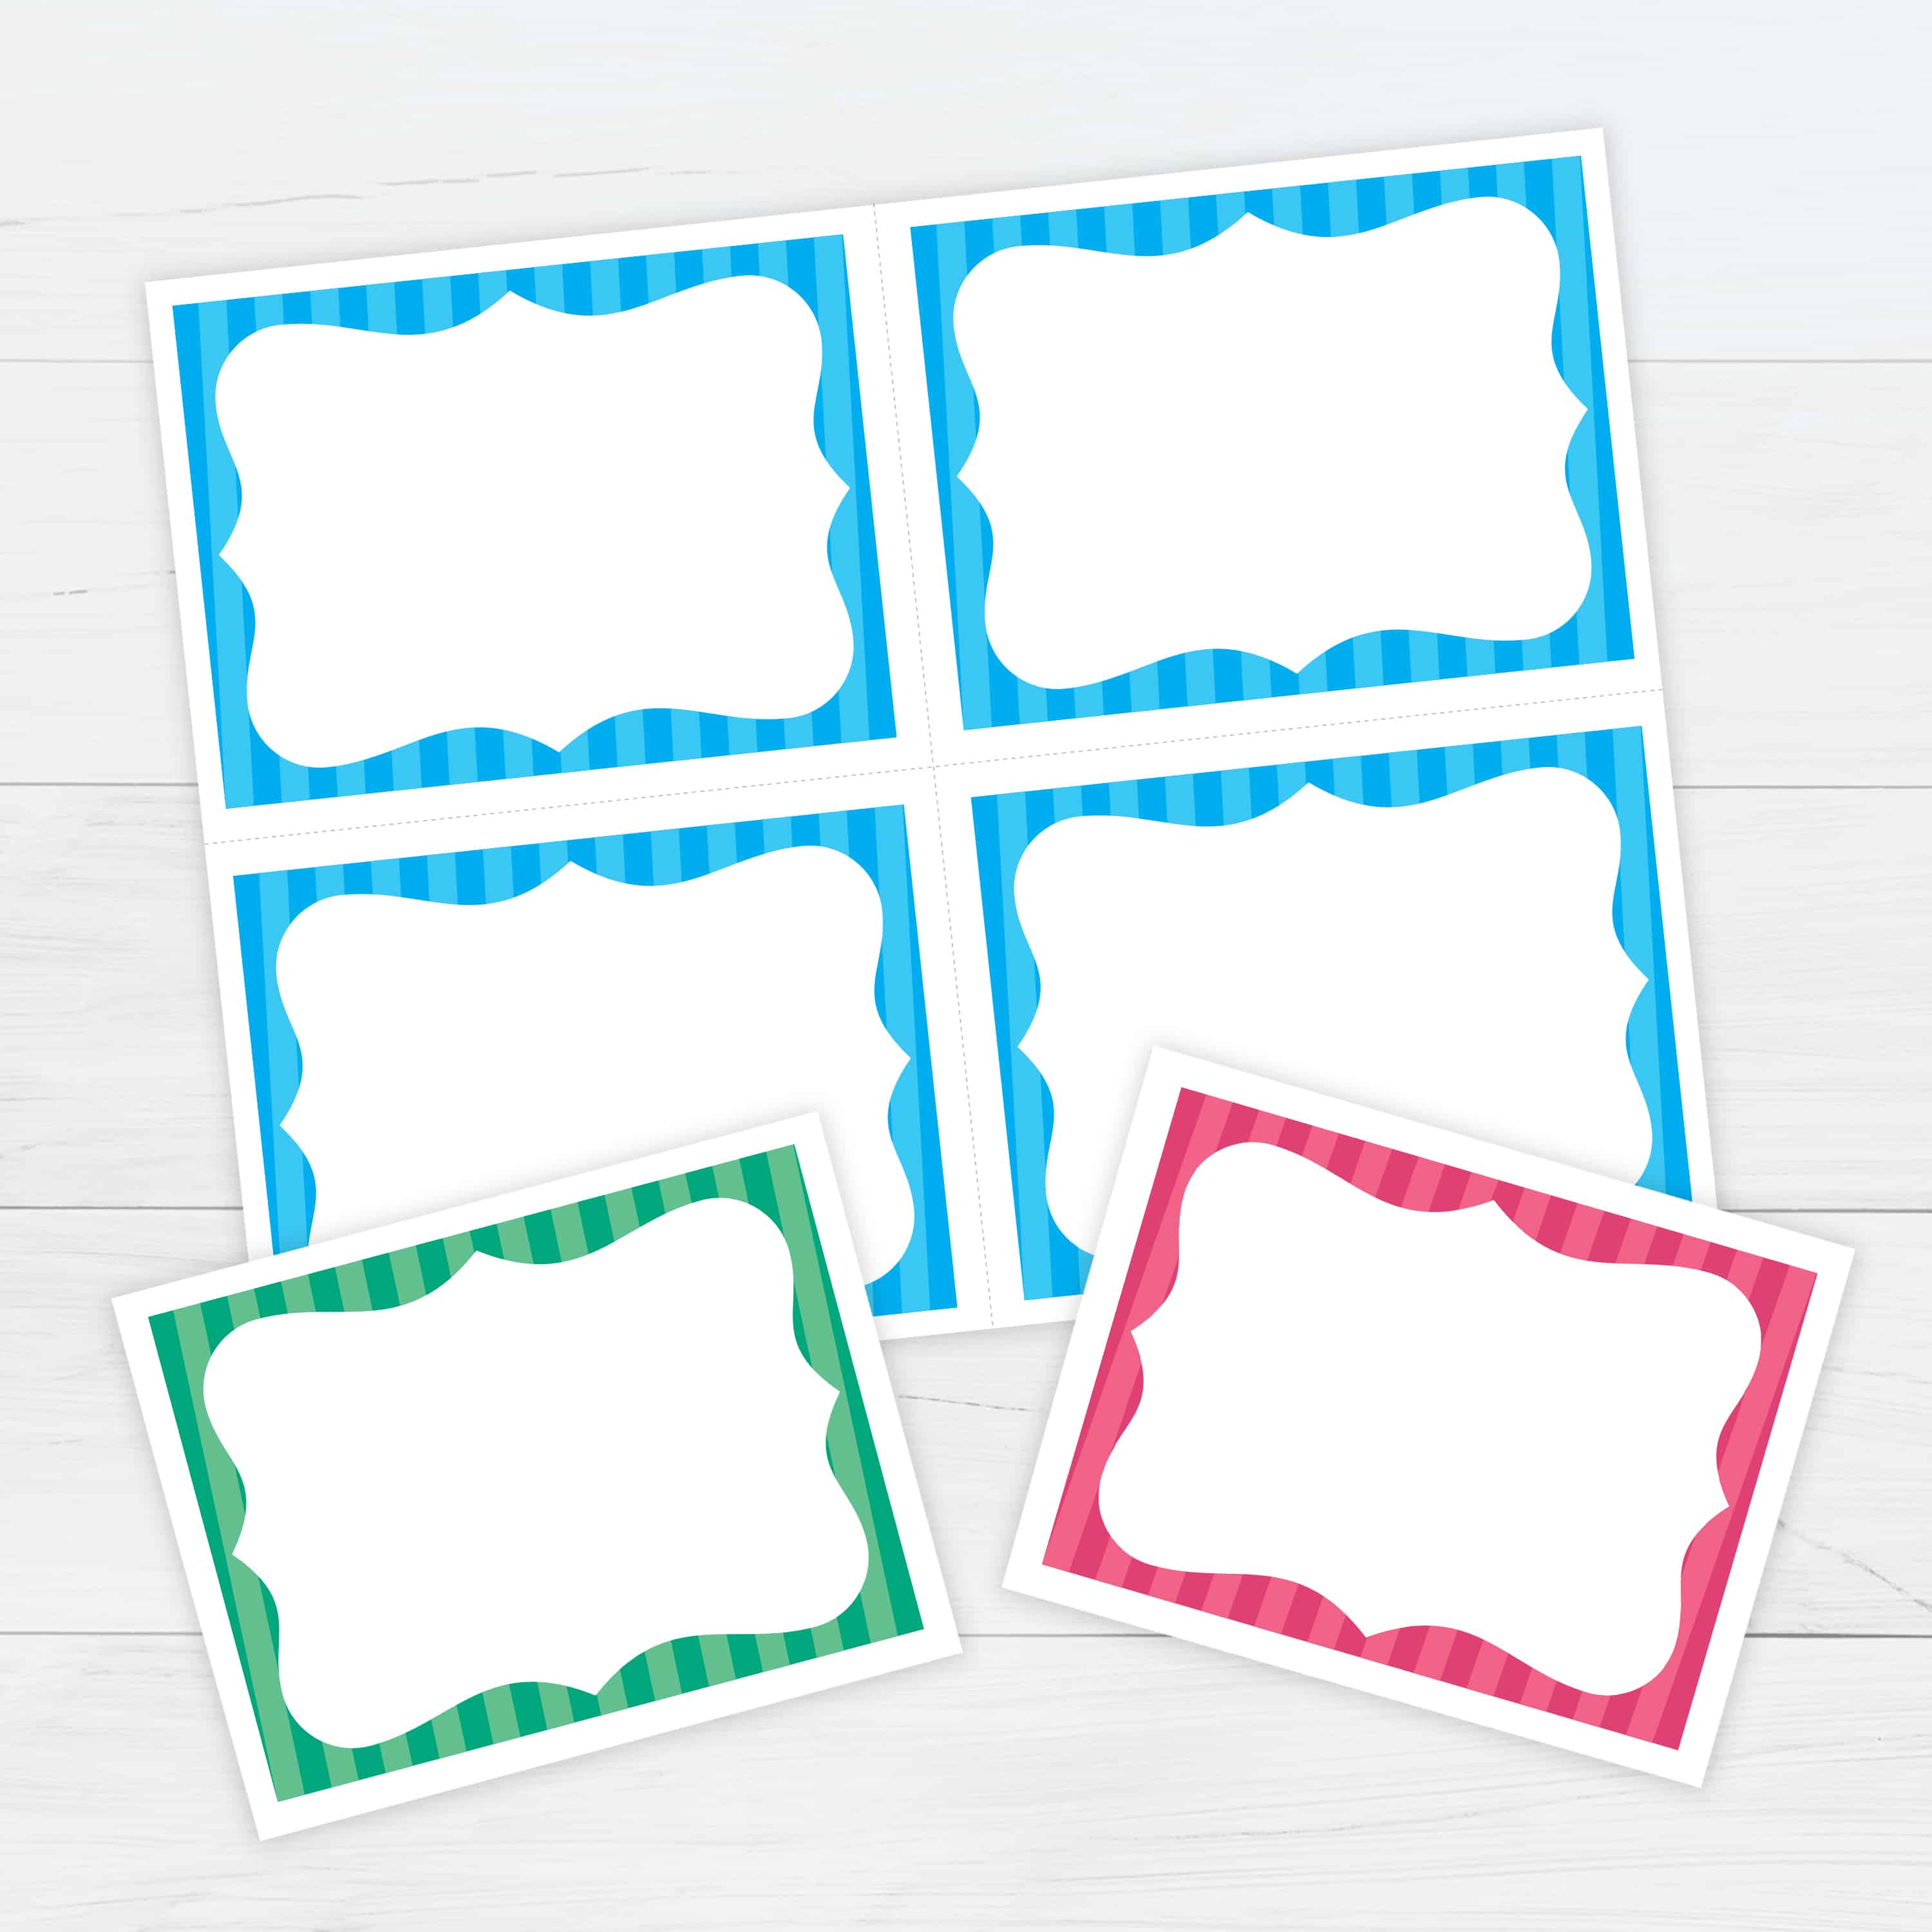 Bordered Flash cards Template 20 - Free Printable Download Inside Free Printable Flash Cards Template